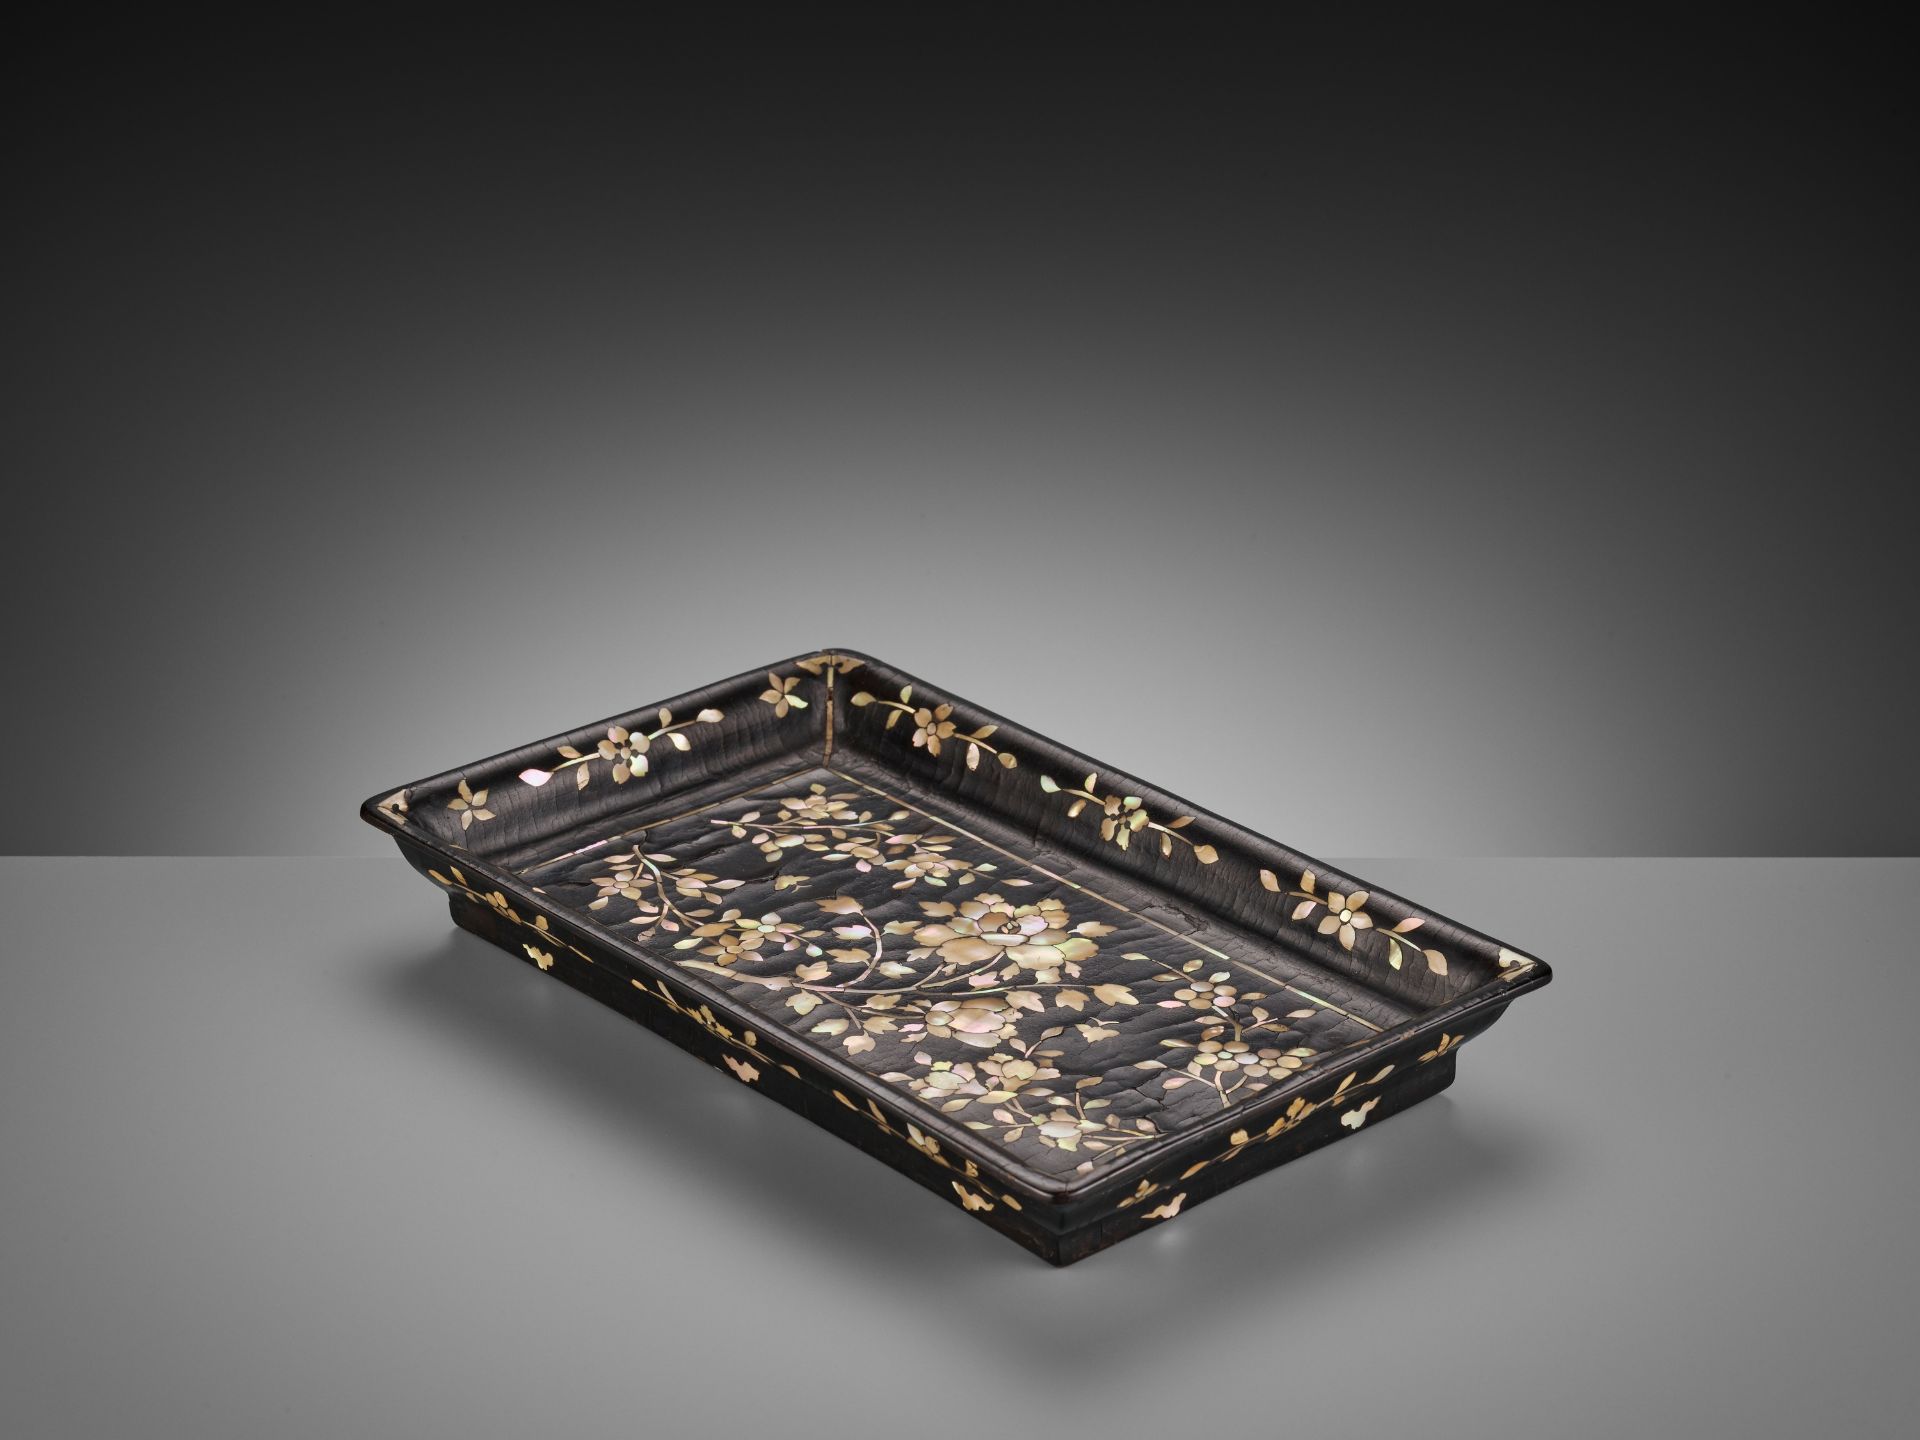 A MOTHER-OF-PEARL INLAID BLACK LACQUER 'PEONY' TRAY, MING DYNASTY - Image 9 of 12